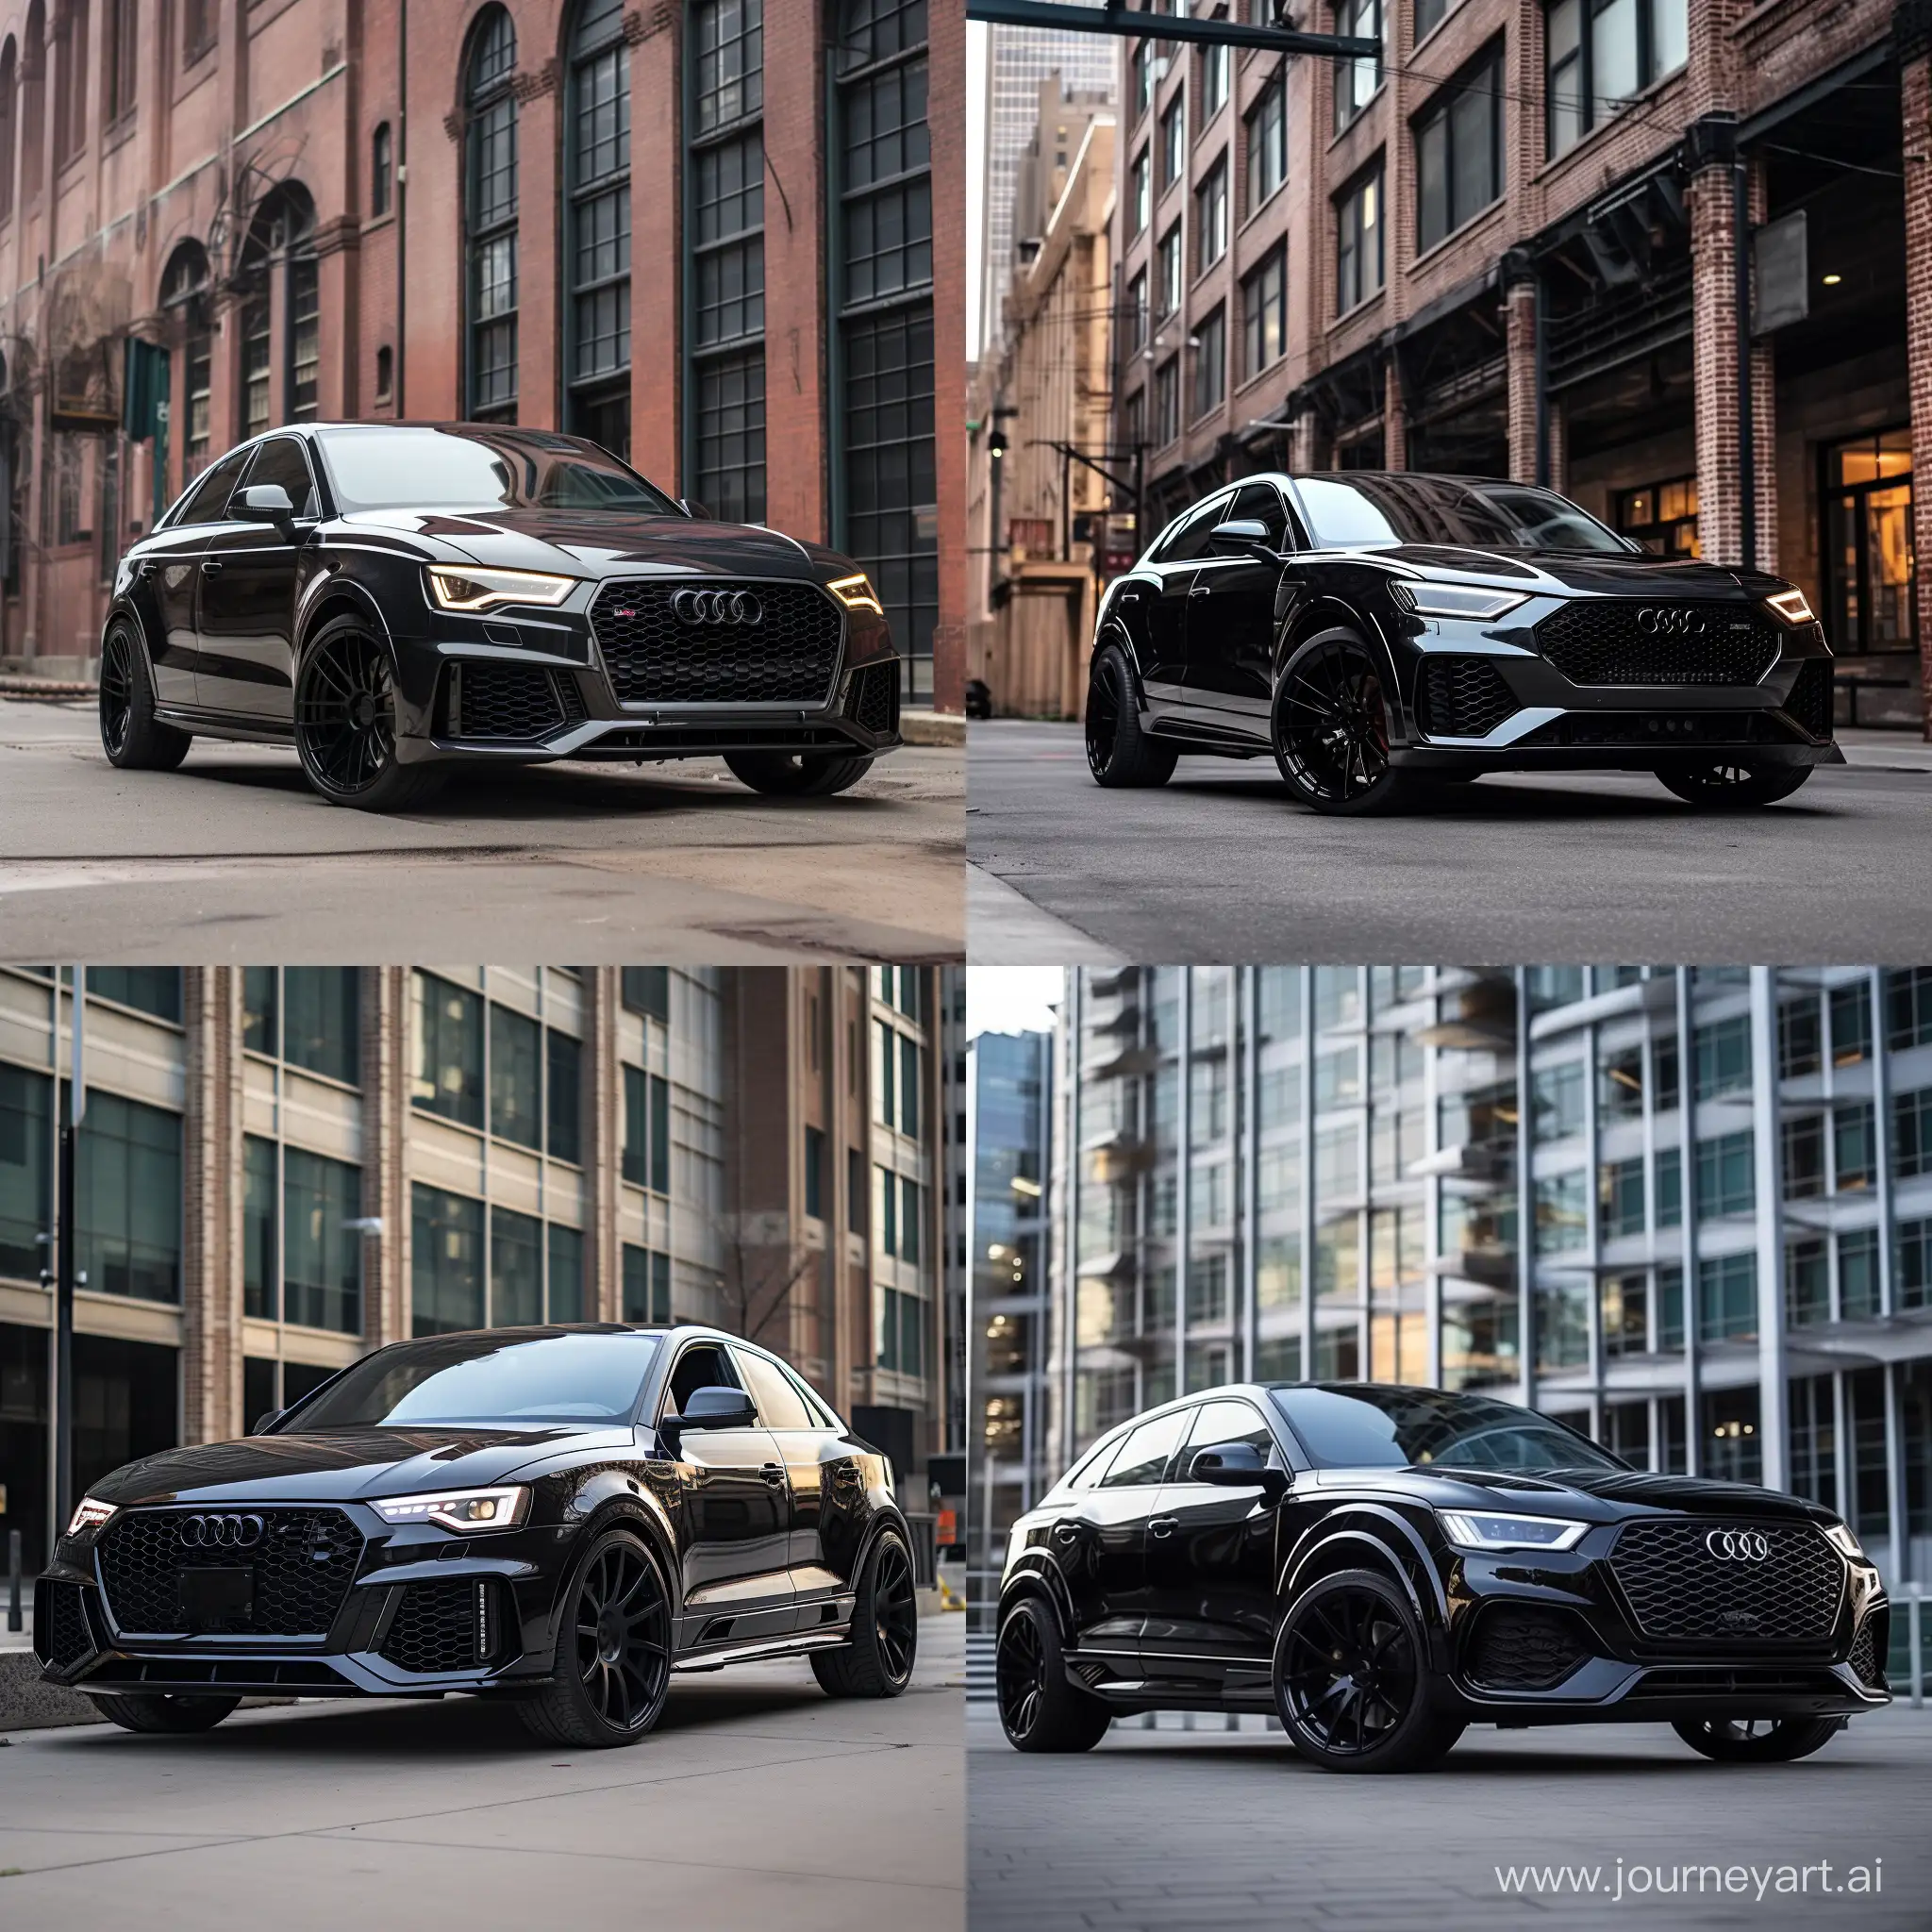 Sleek-Black-Audi-RSQ3-Coupe-with-22Inch-Concave-Wheels-AR-11